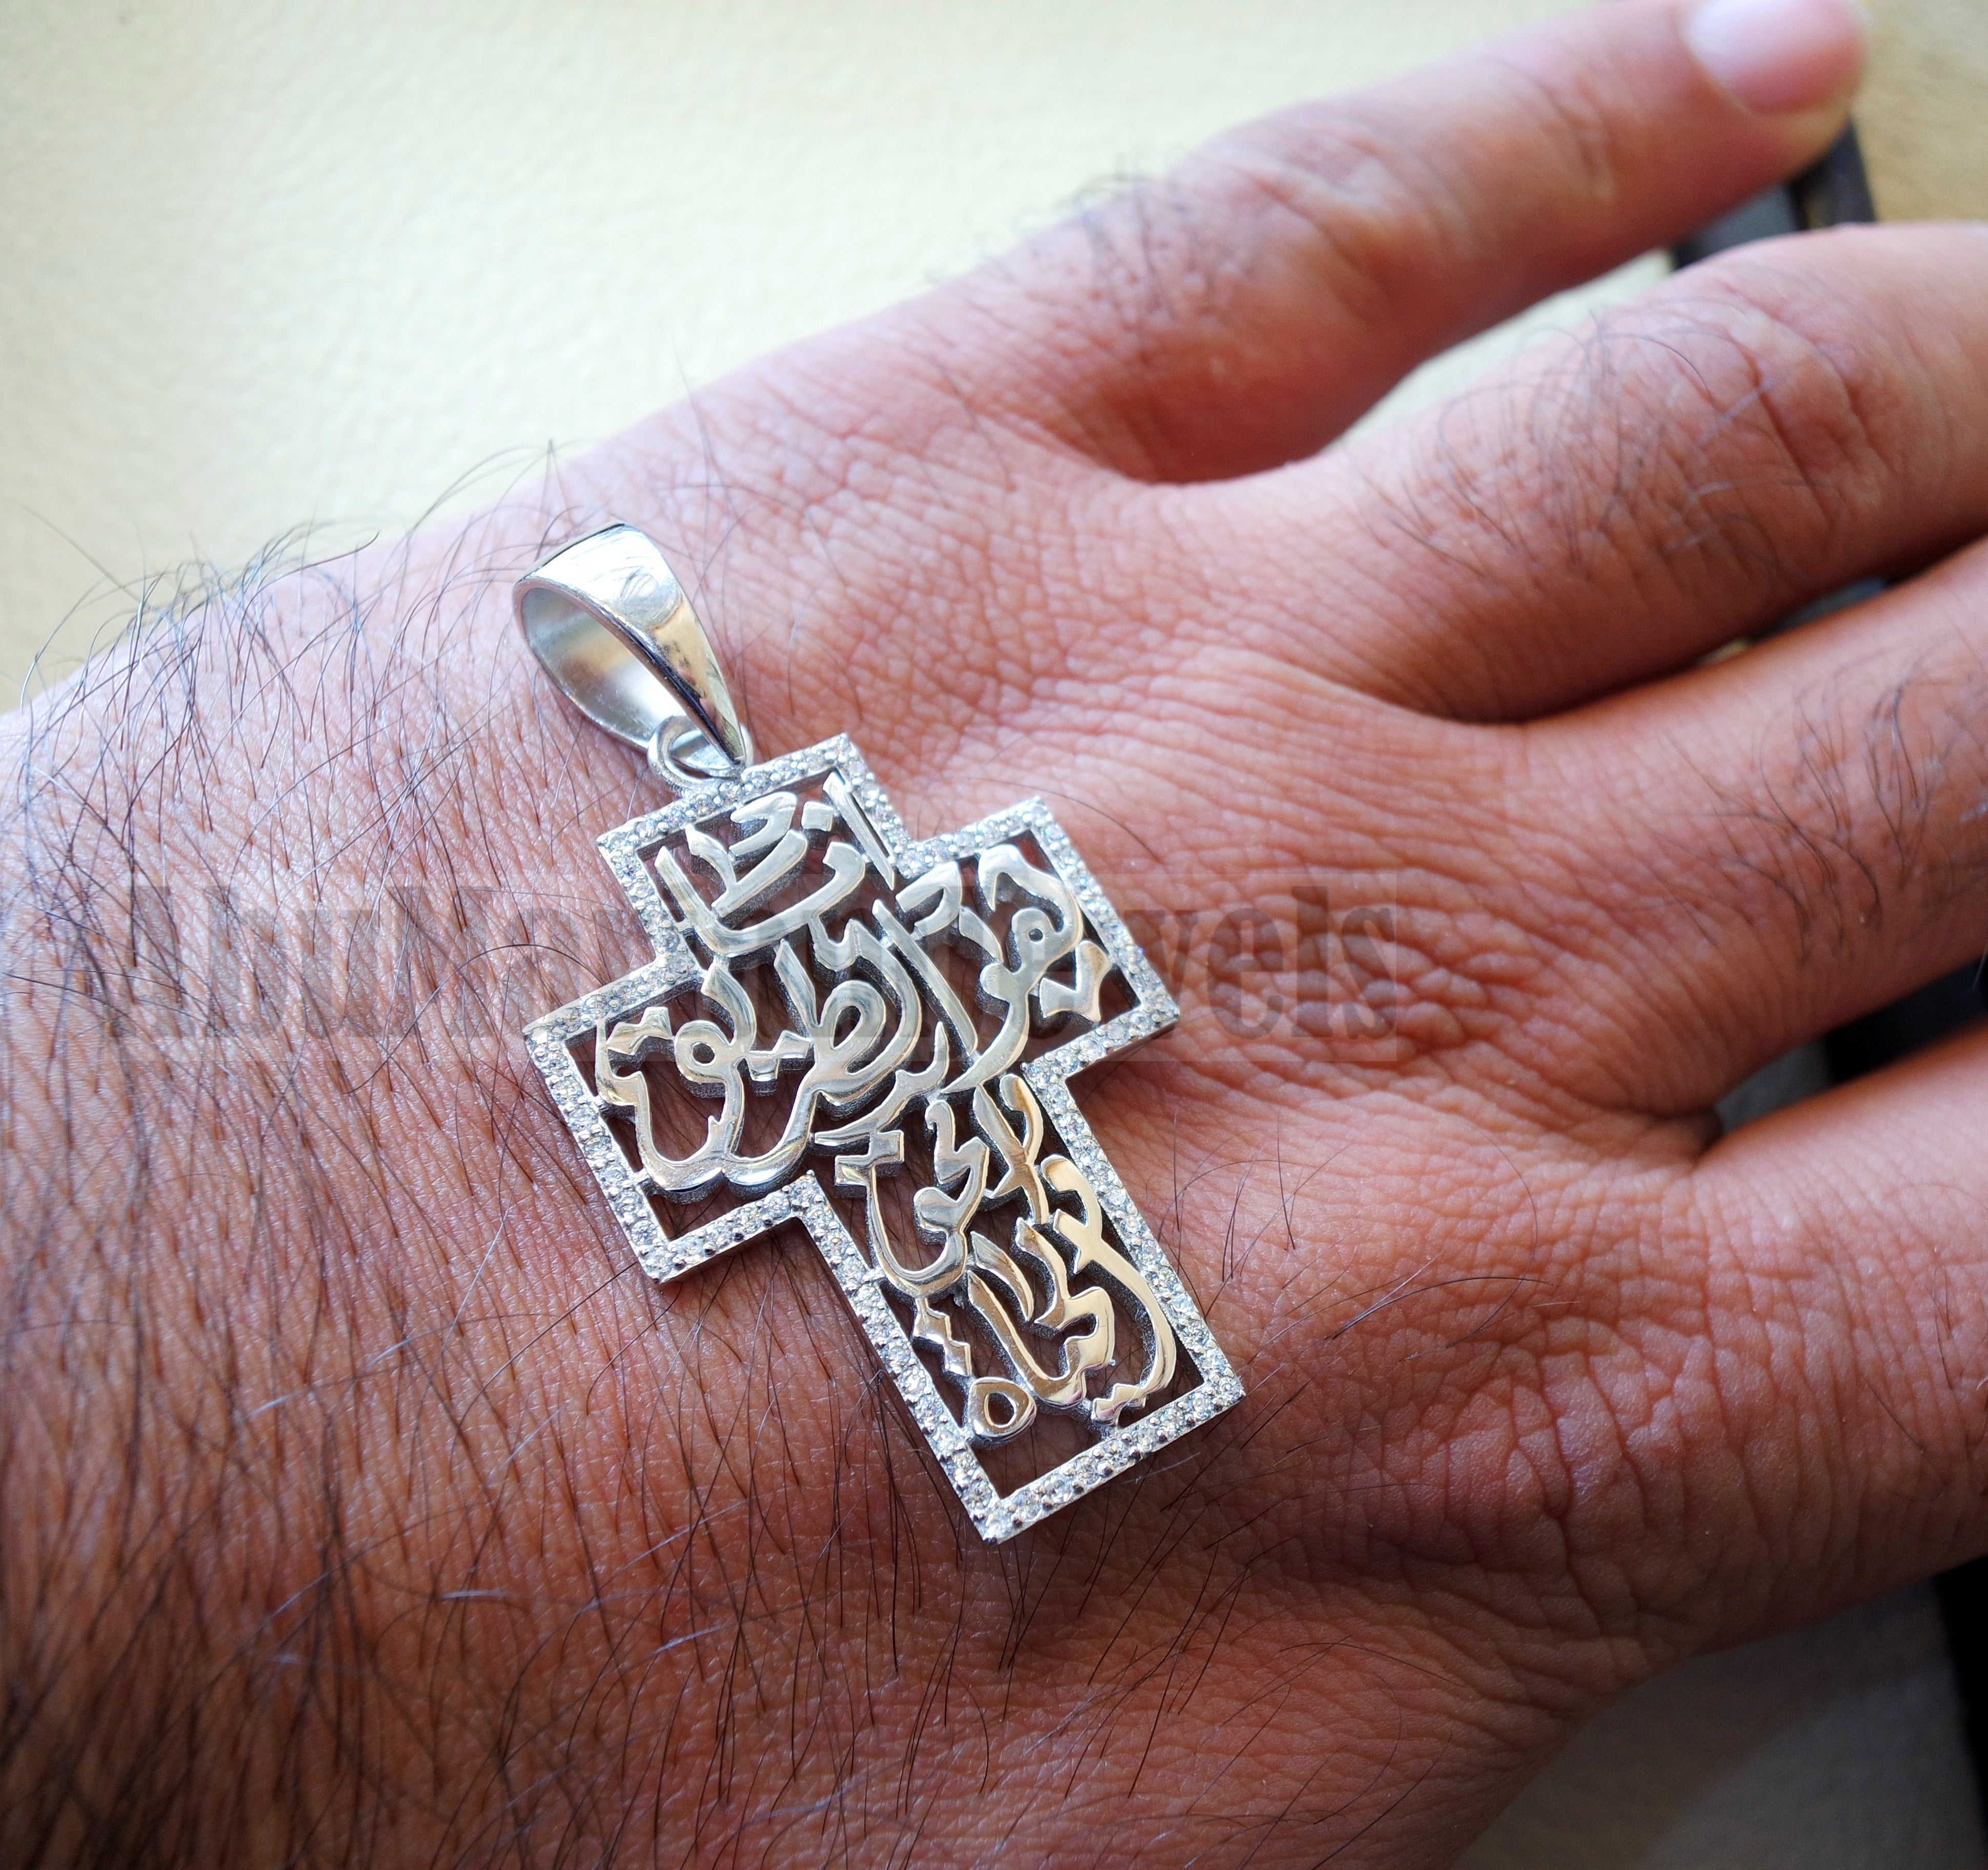 Arabic calligraphy cross pendant sterling silver 925 and white cubic zirconia jewelry catholic orthodox symbol christianity handmade heavy thick fast shipping